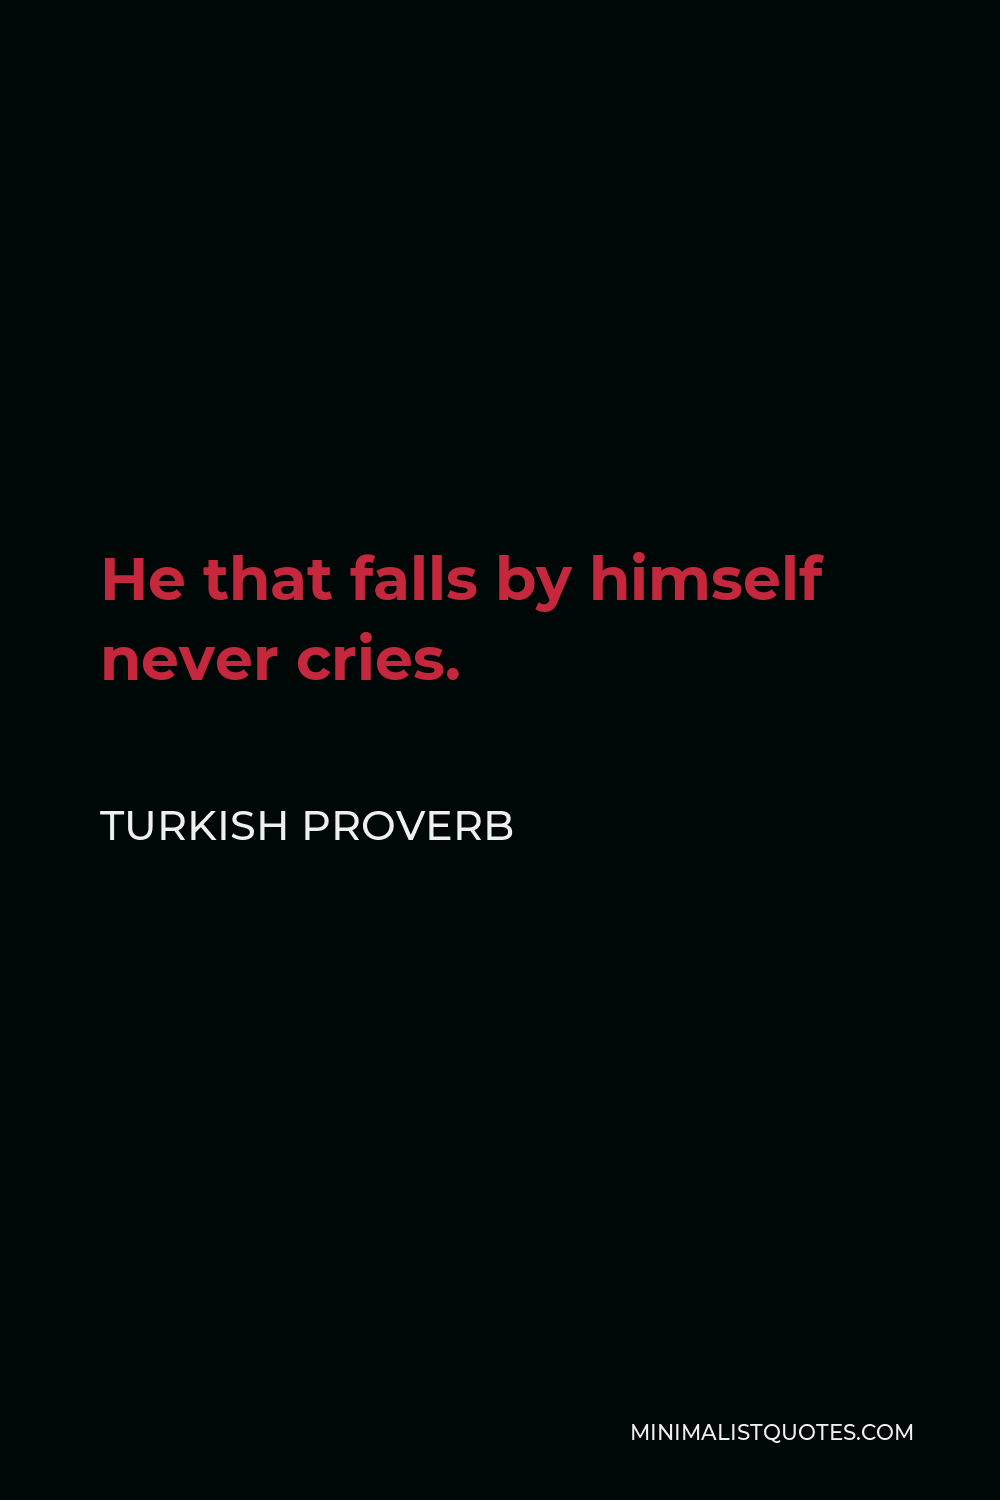 Turkish Proverb Quote - He that falls by himself never cries.